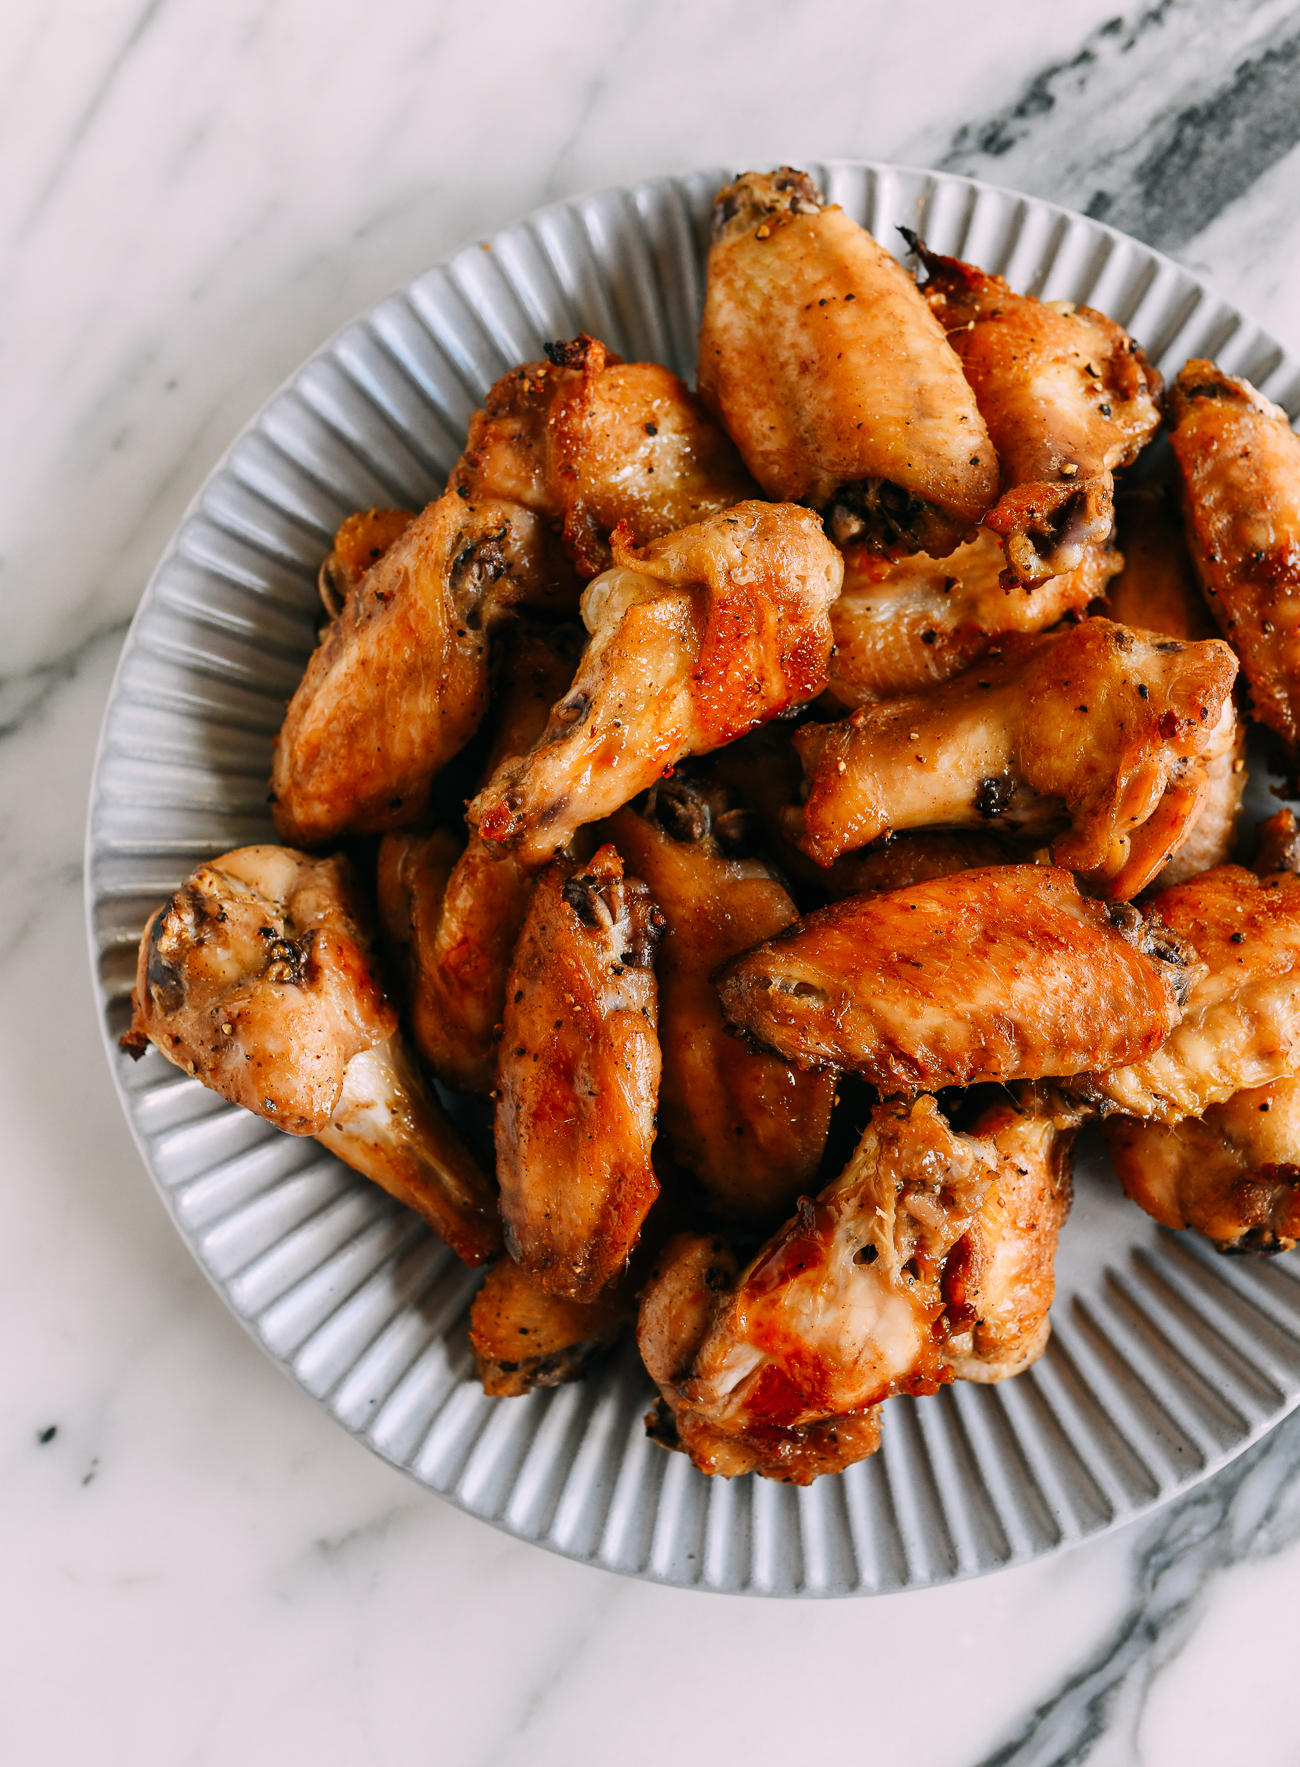 Oyster Sauce Baked Chicken Wings